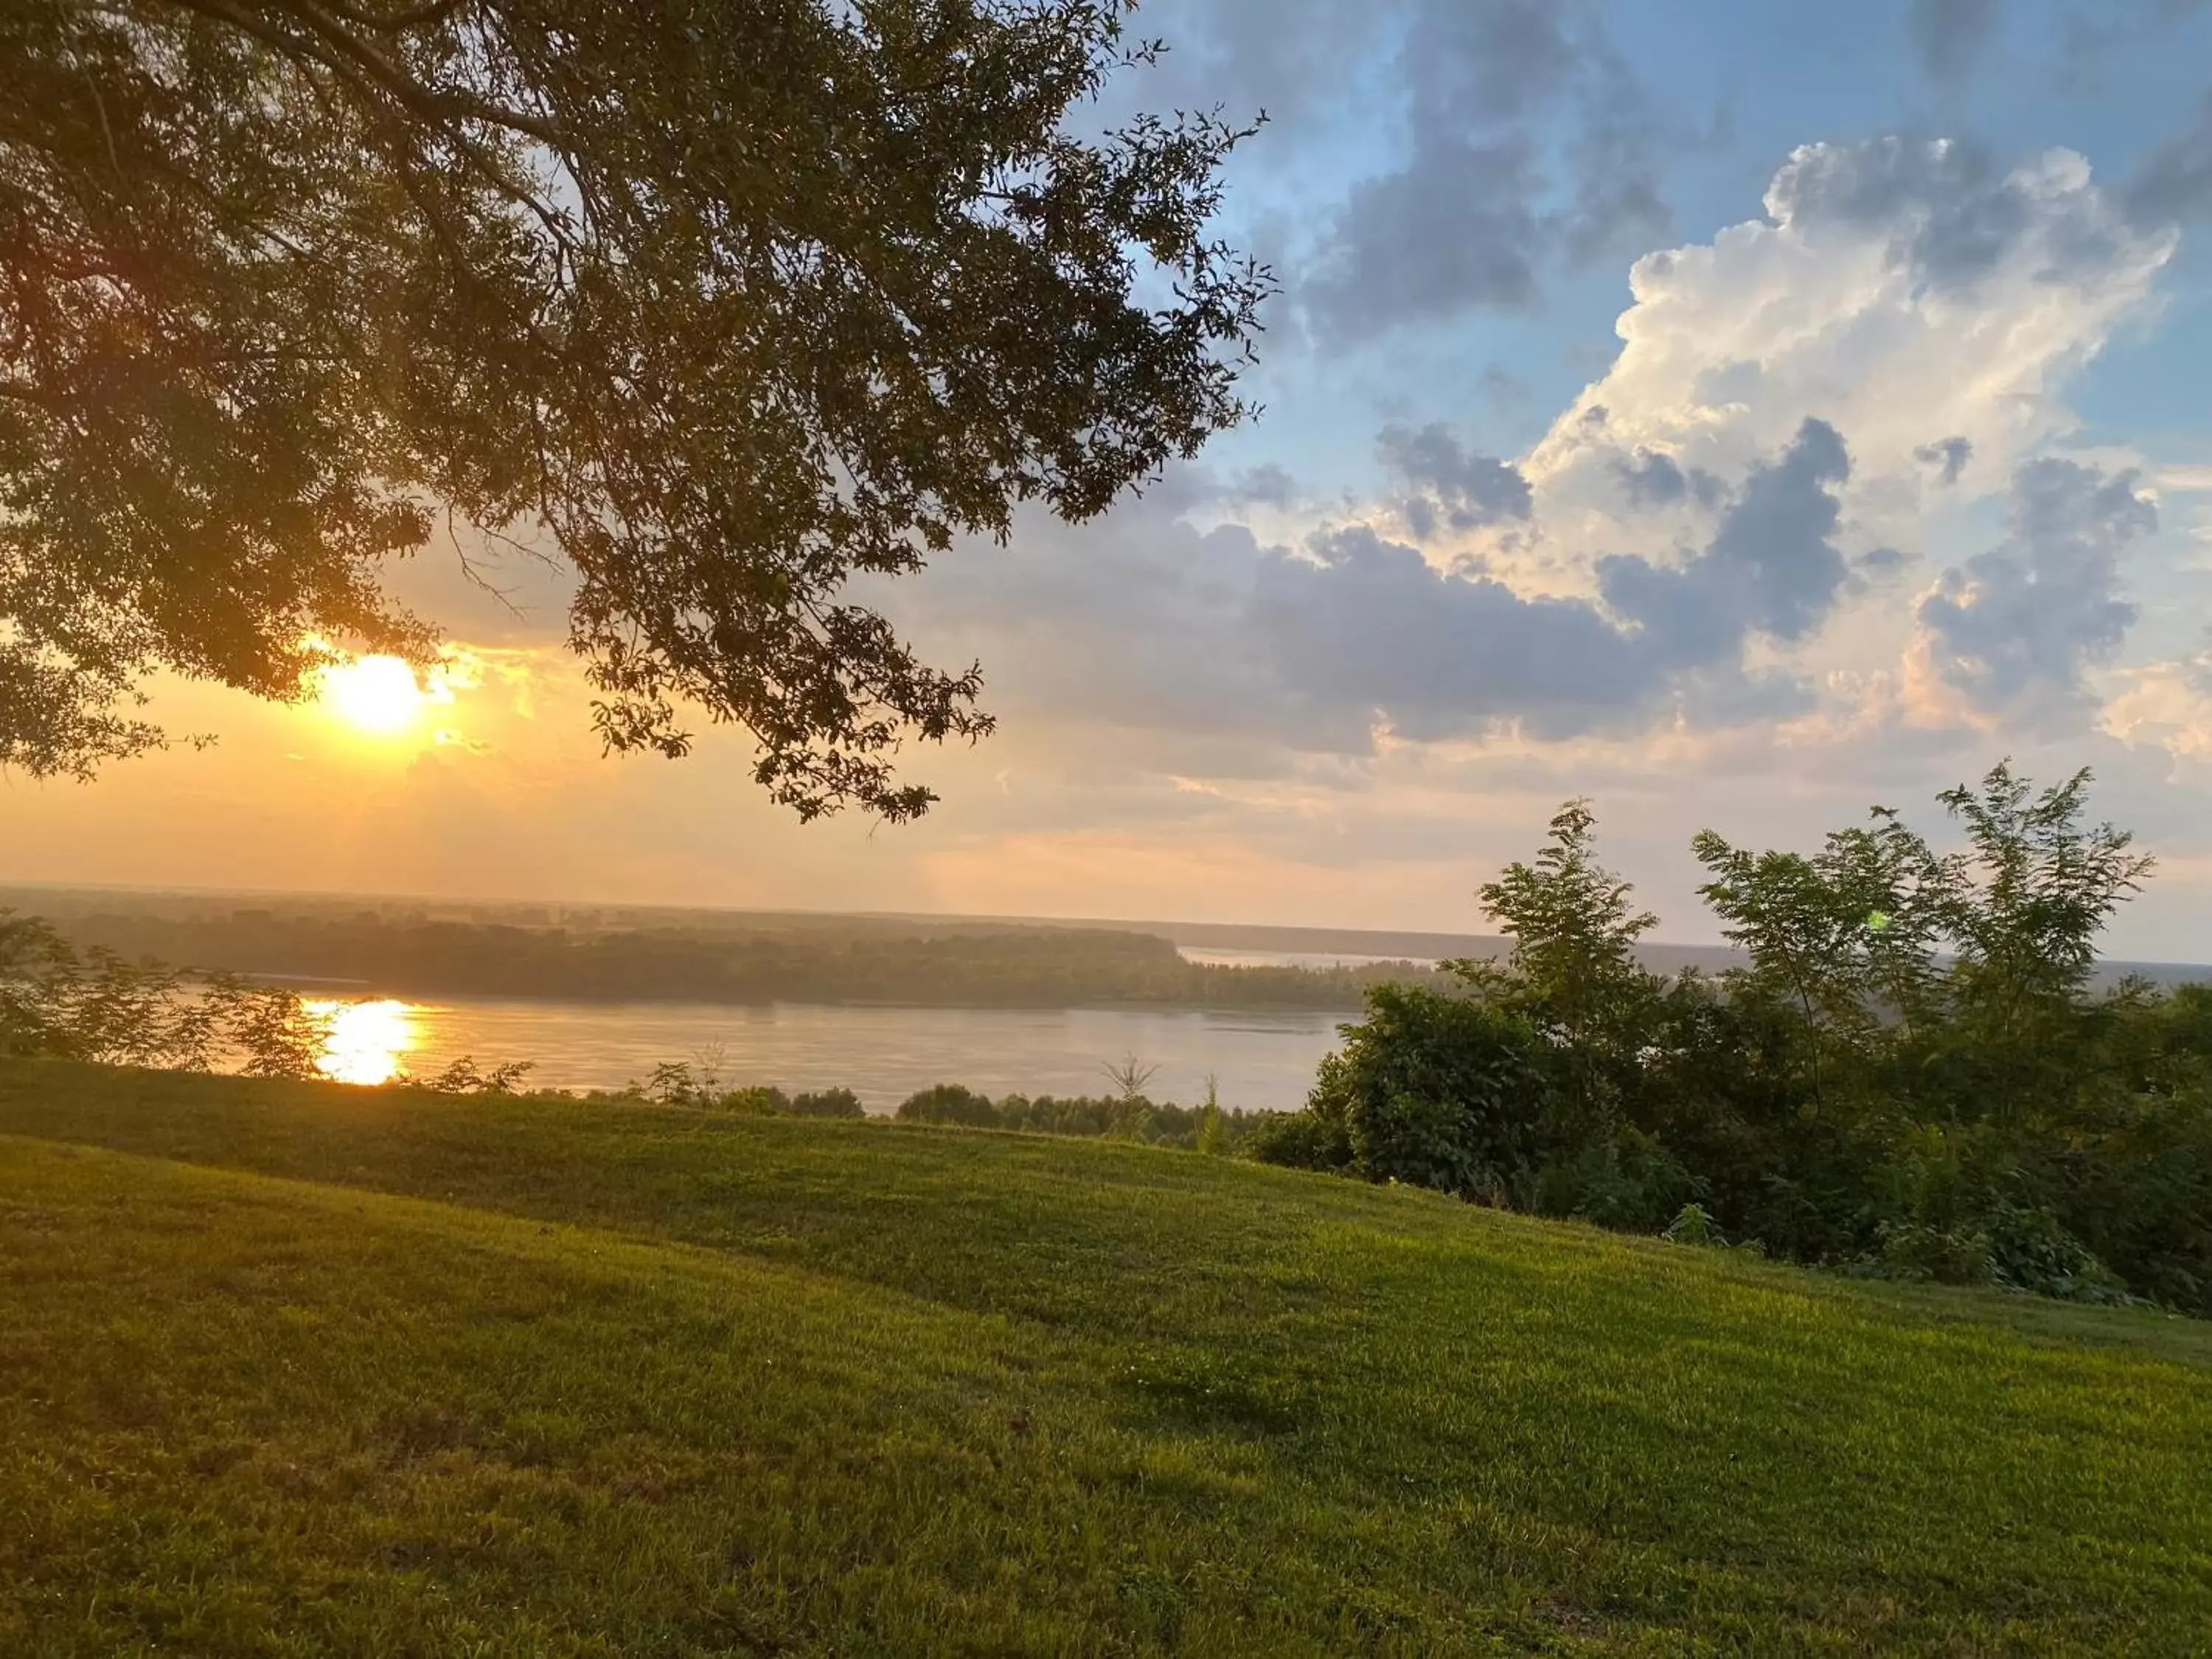 Sunset in The King's Daughters B and B on the Bluff overlooking the Mighty Mississippi